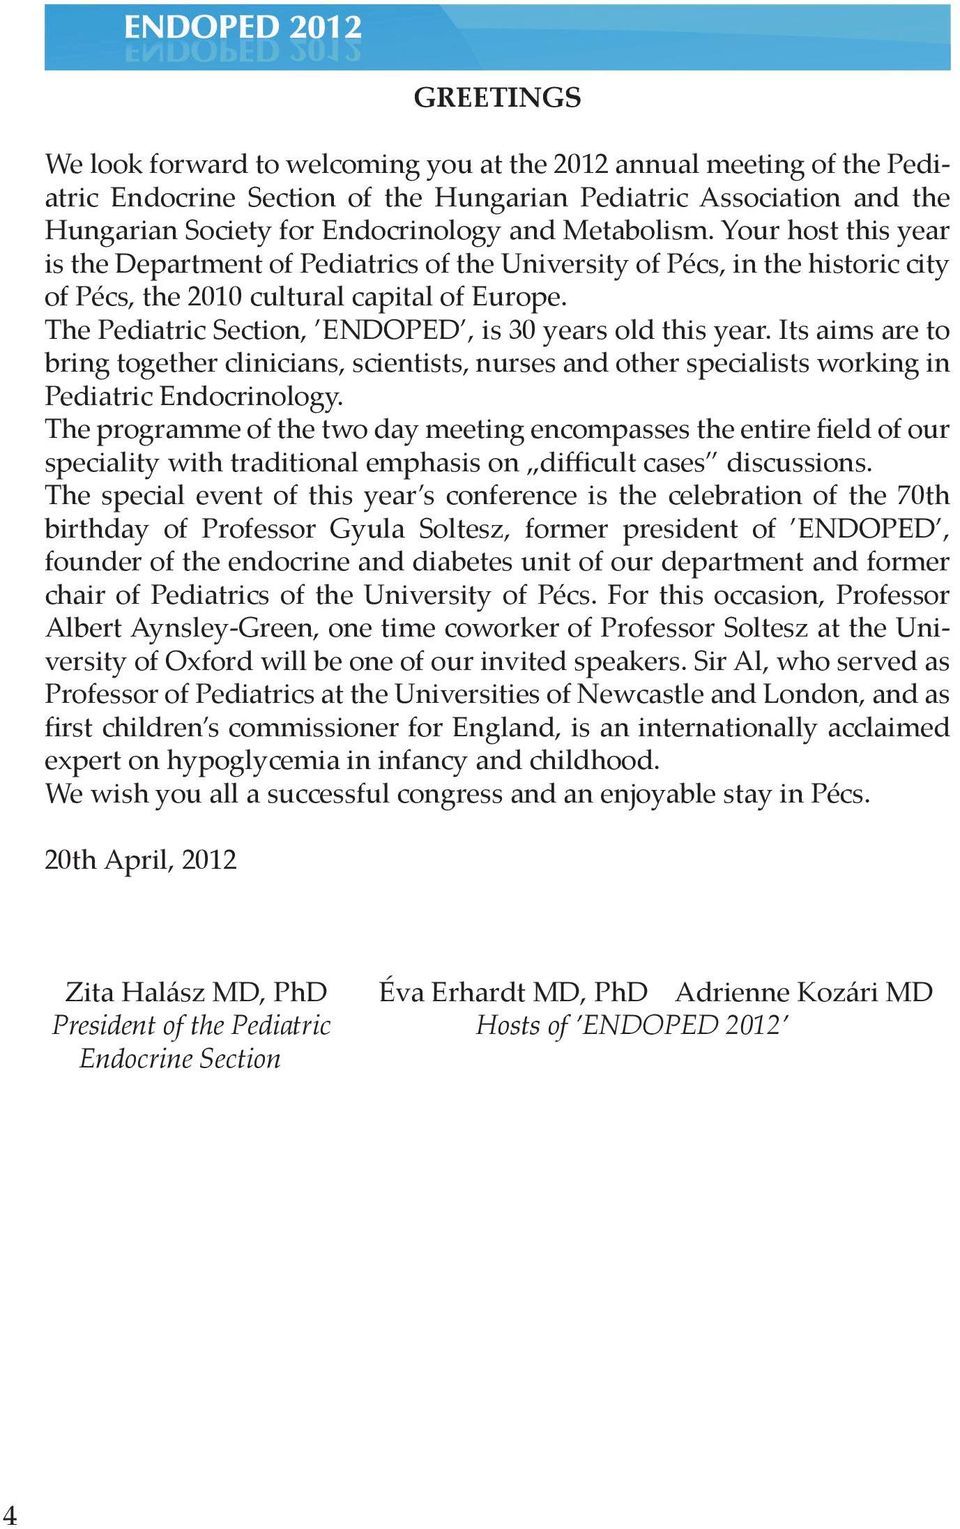 The Pediatric Section, ENDOPED, is 30 years old this year. Its aims are to bring together clinicians, scientists, nurses and other specialists working in Pediatric Endocrinology.